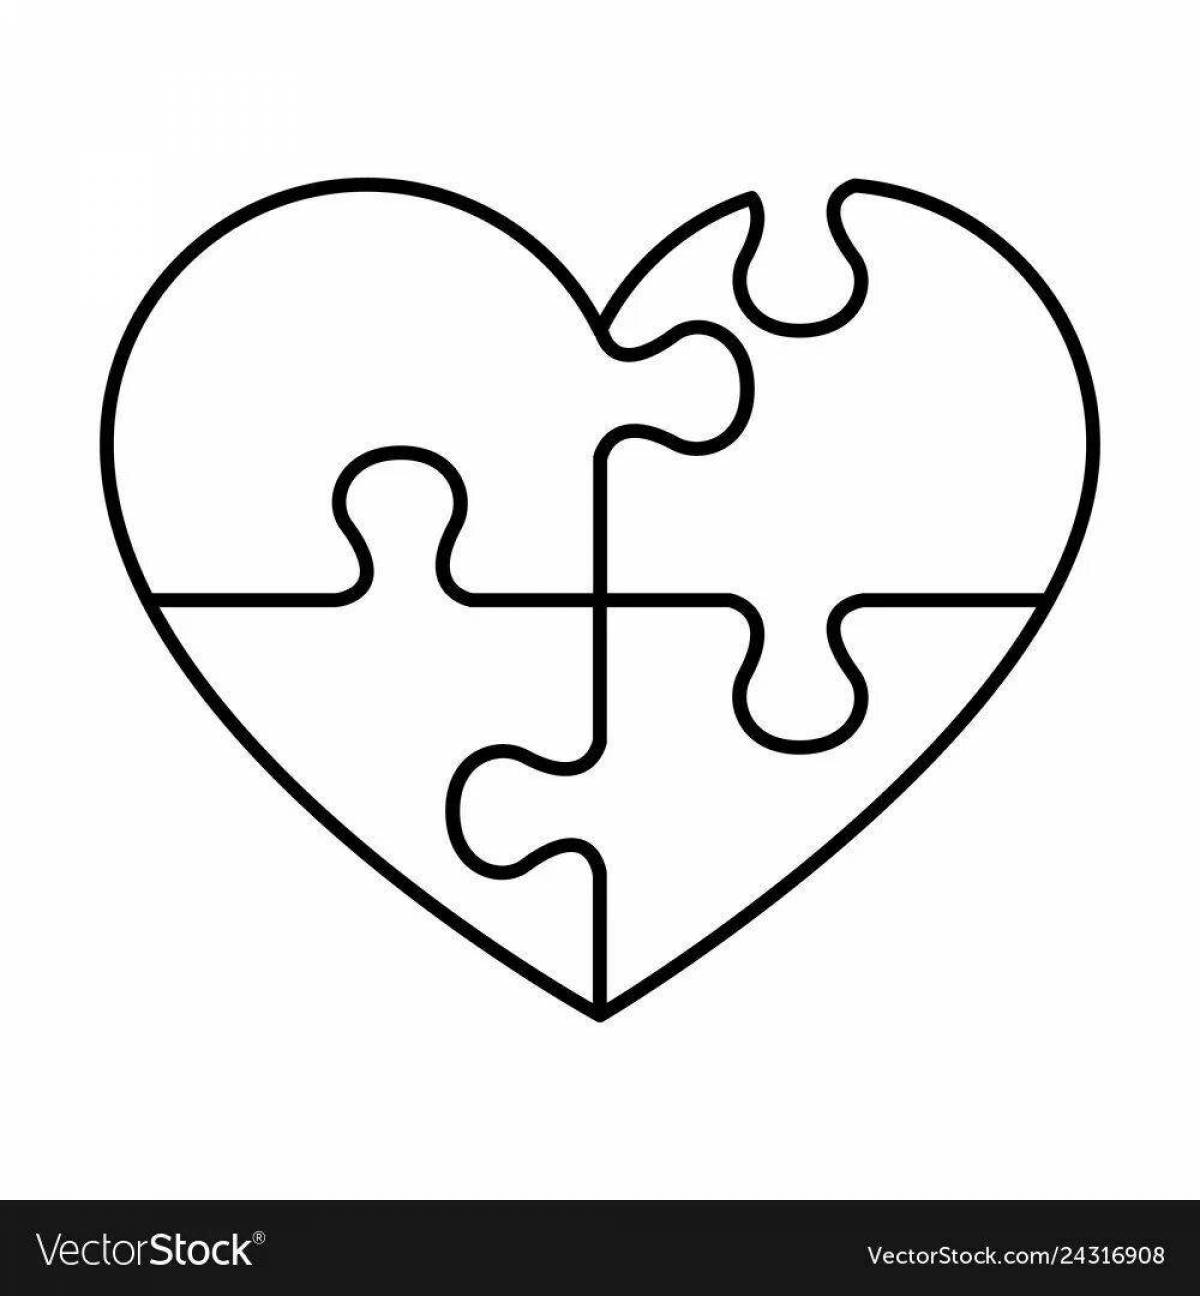 Coloring page with colorful heart